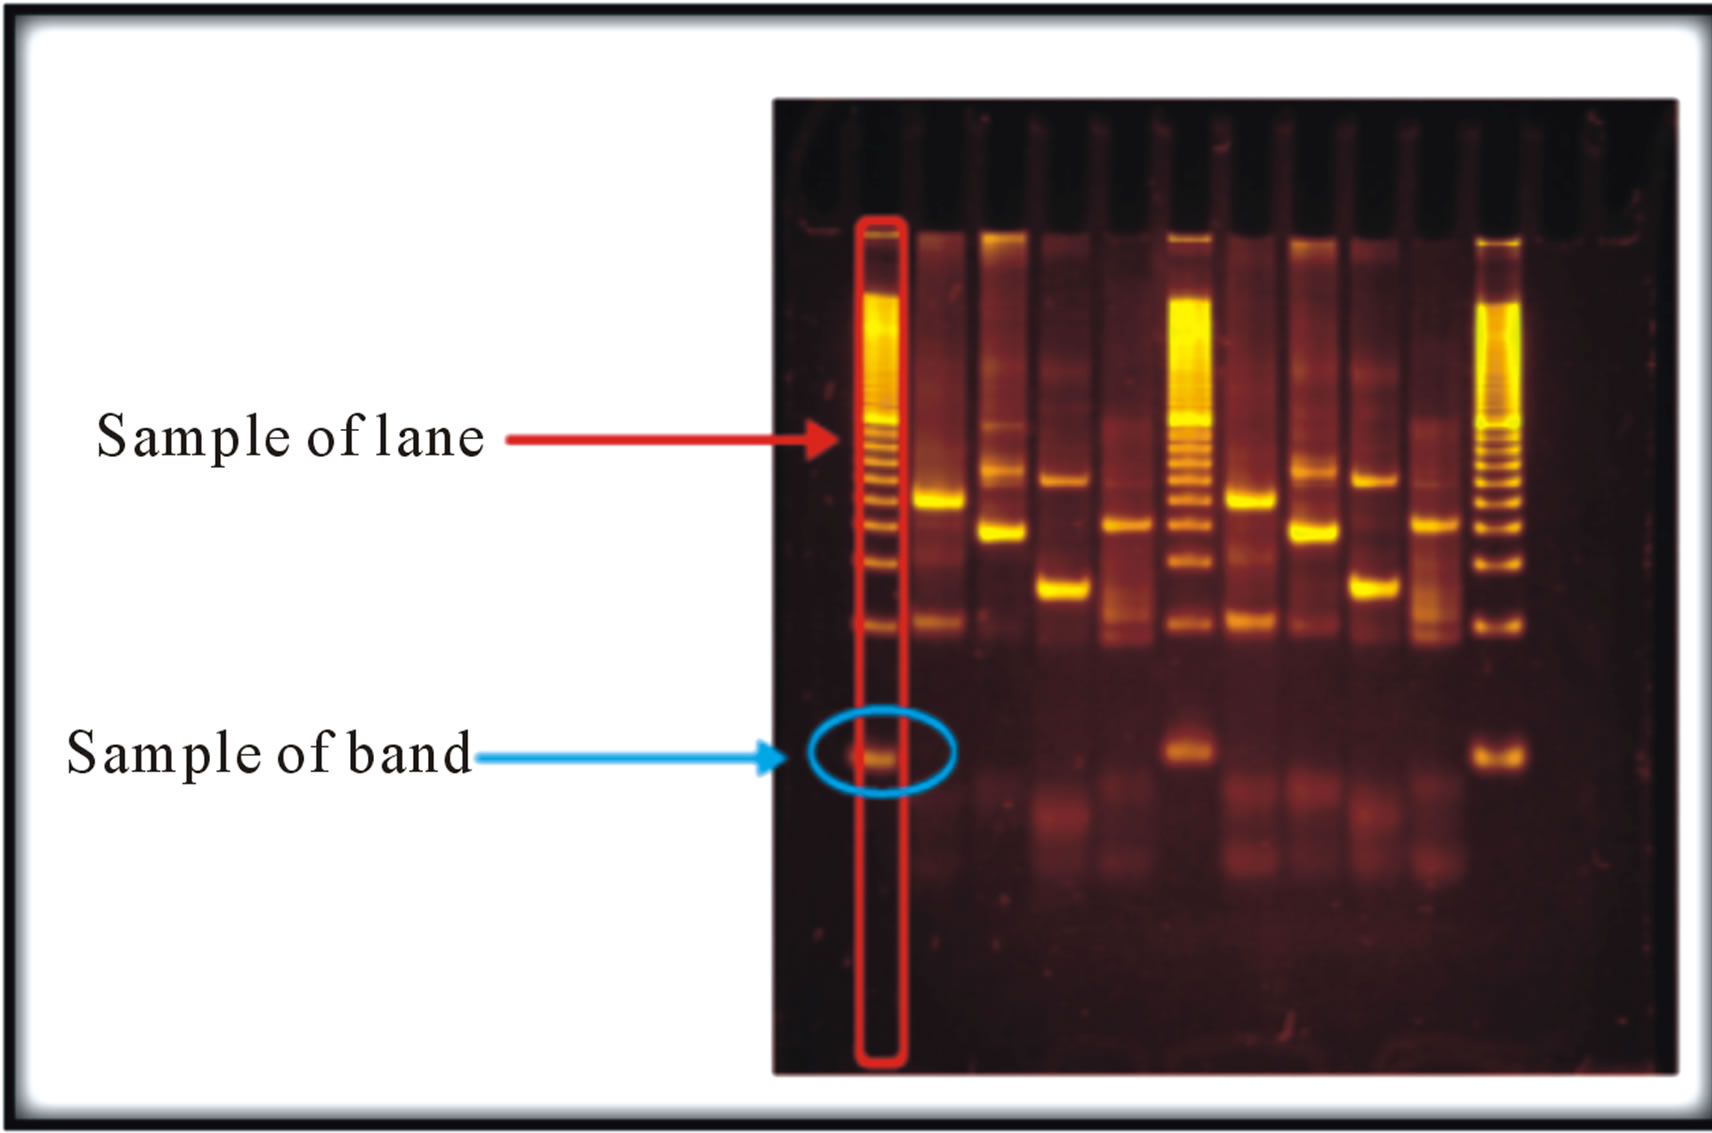 Semiautomatic detection of lanes and bands in DNA gel electrophoresis